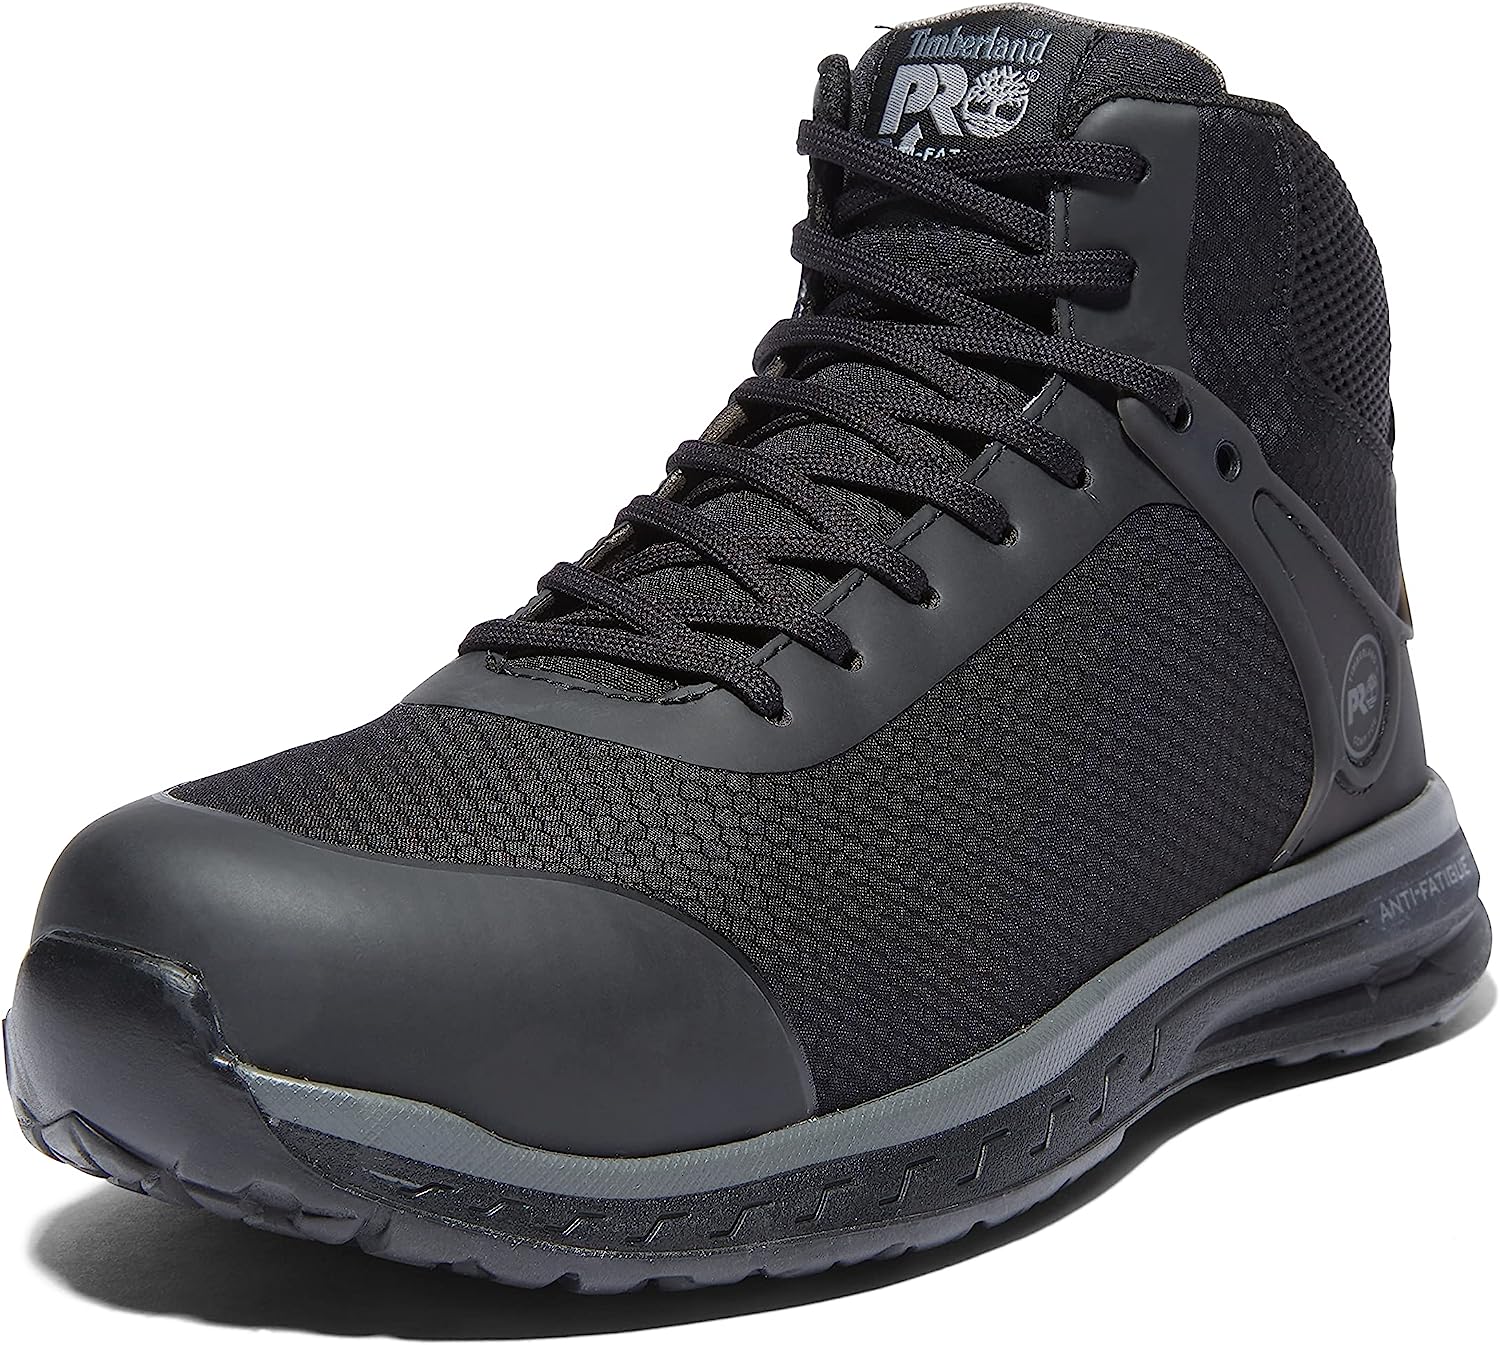 Timberland PRO Men's Drivetrain Mid Composite Safety [...]